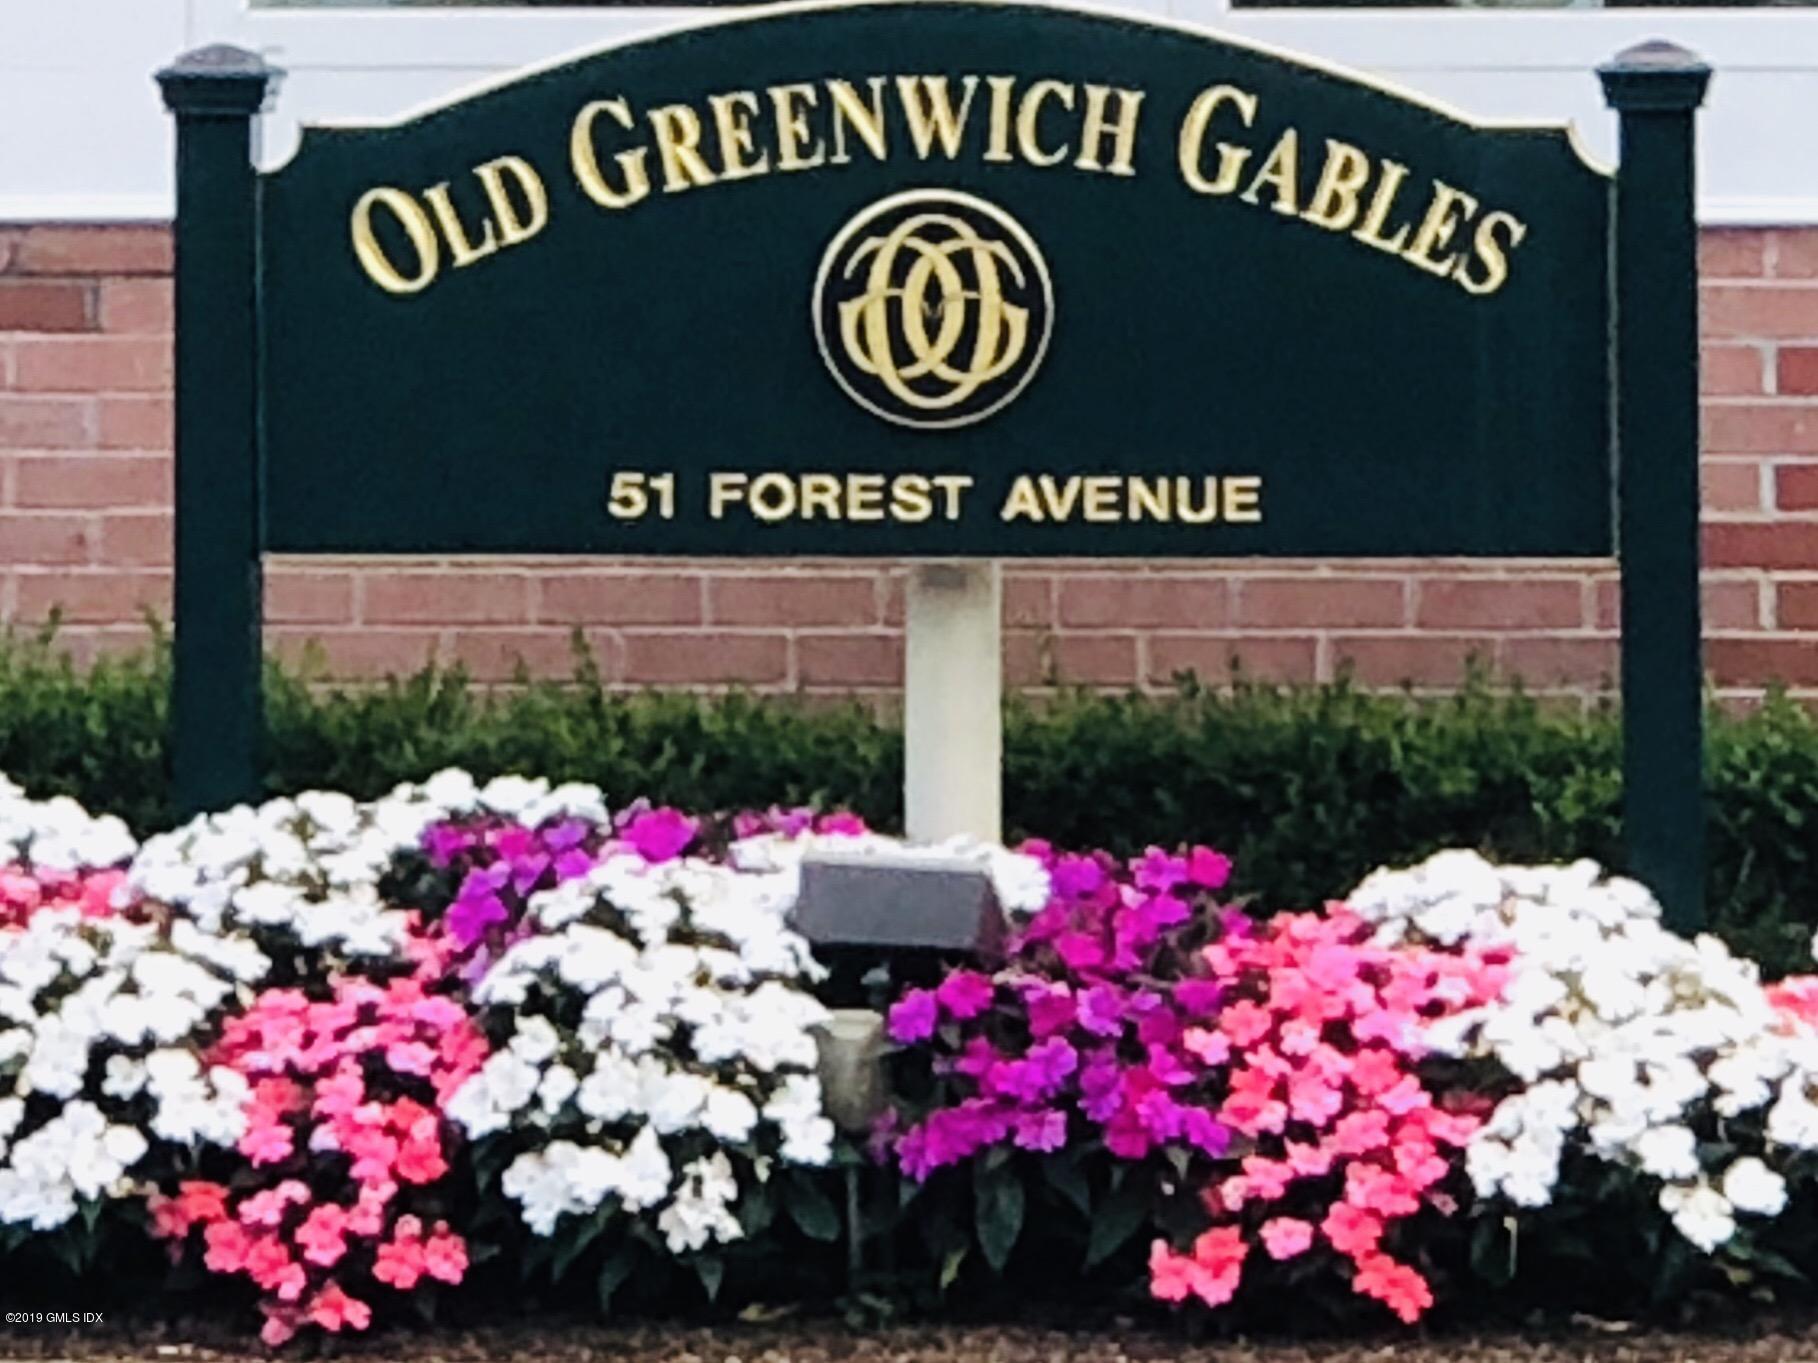 51 Forest Avenue, Old Greenwich, Connecticut - 1 Bedrooms  
2 Bathrooms - 